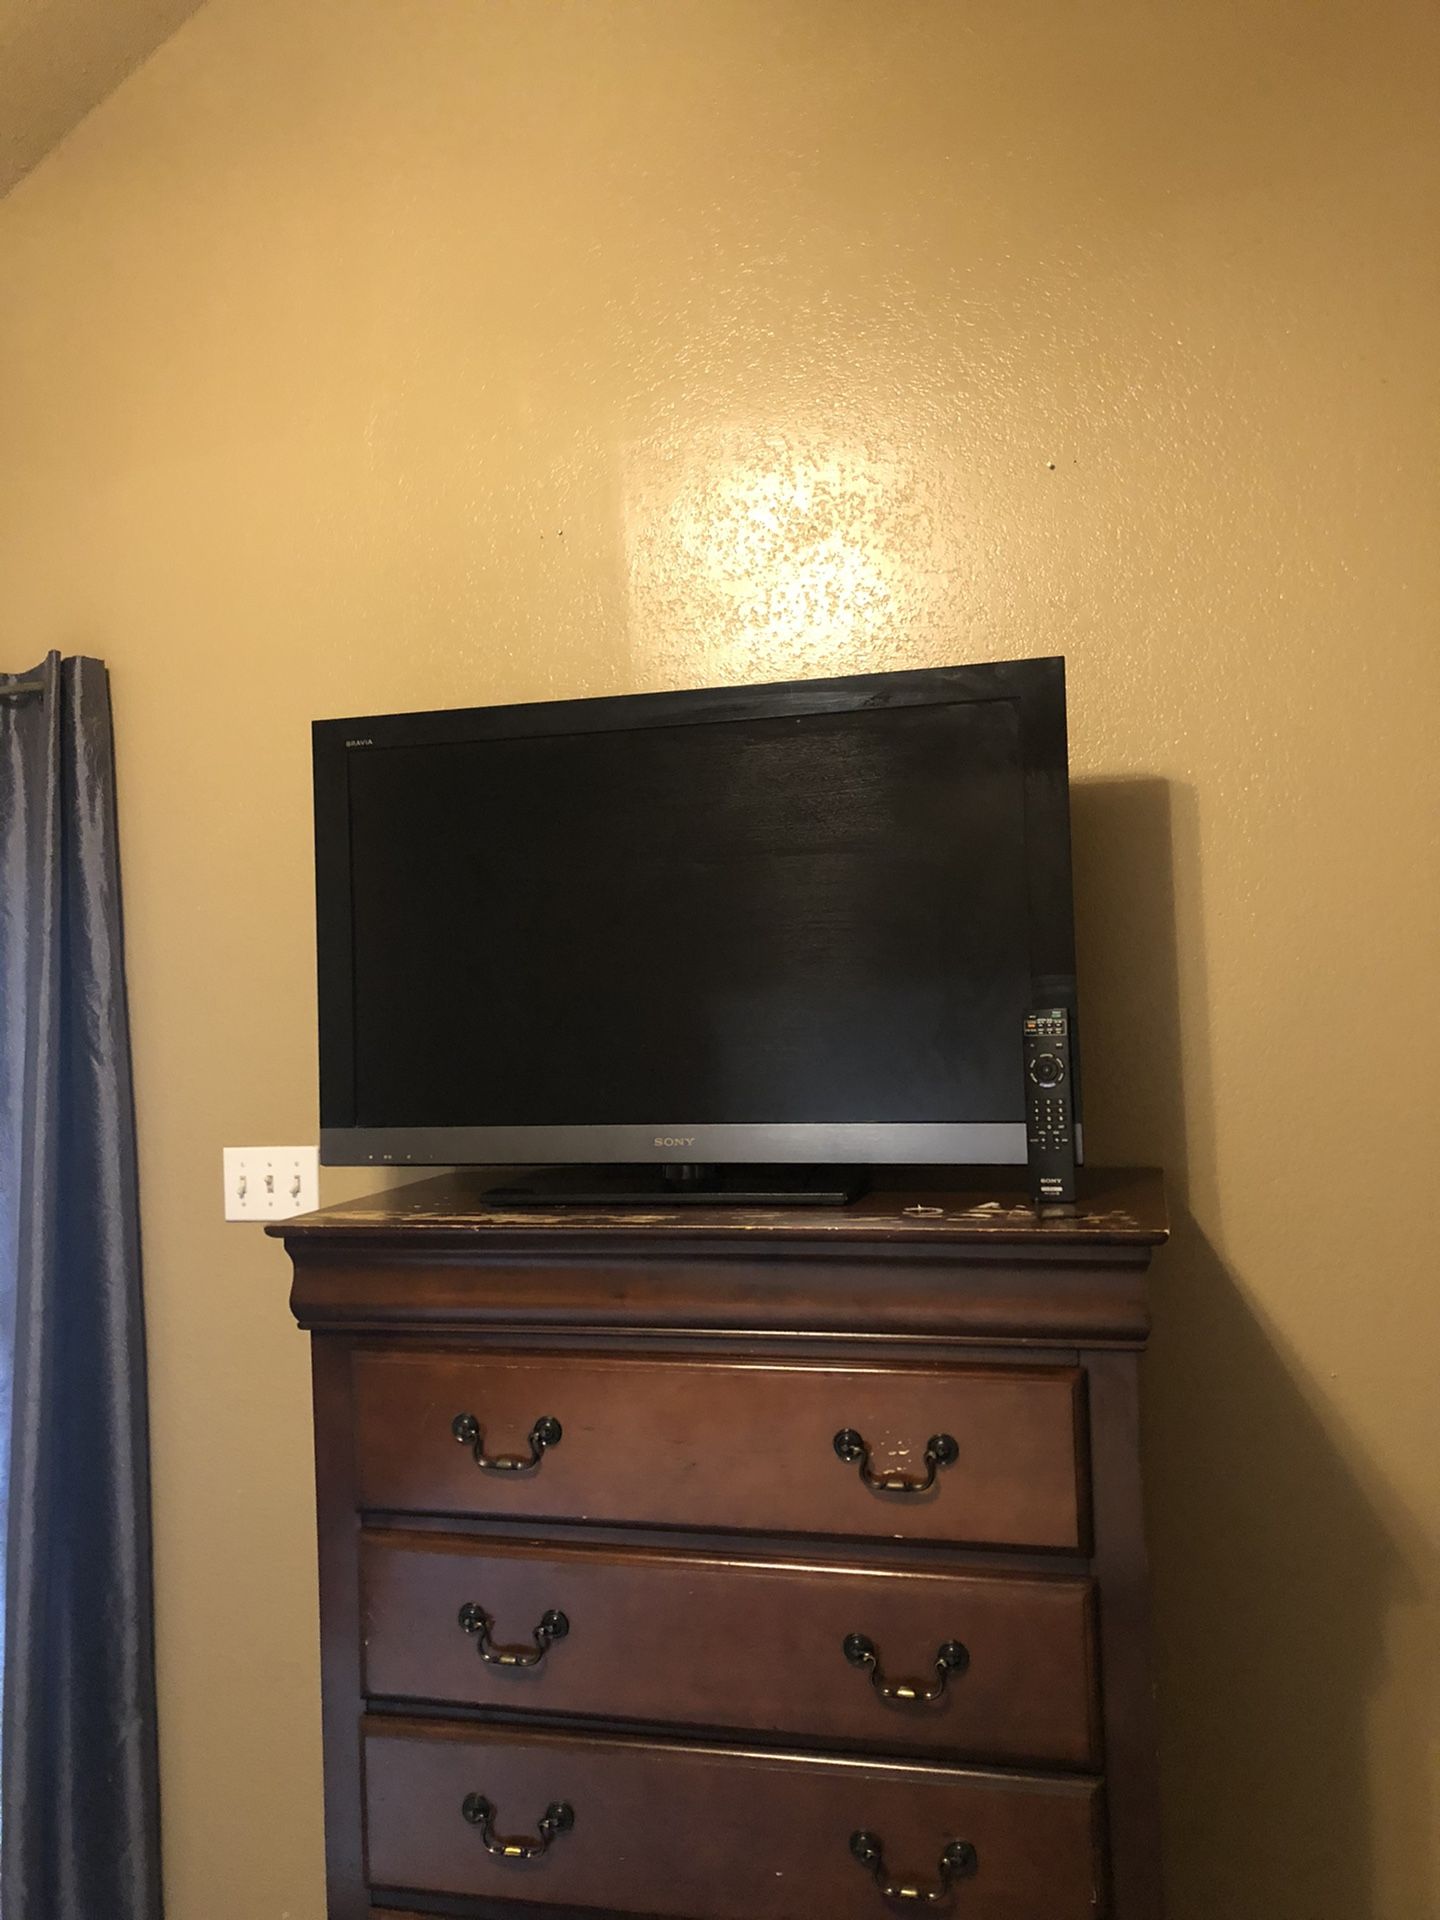 Sony 40 inch TV with remote